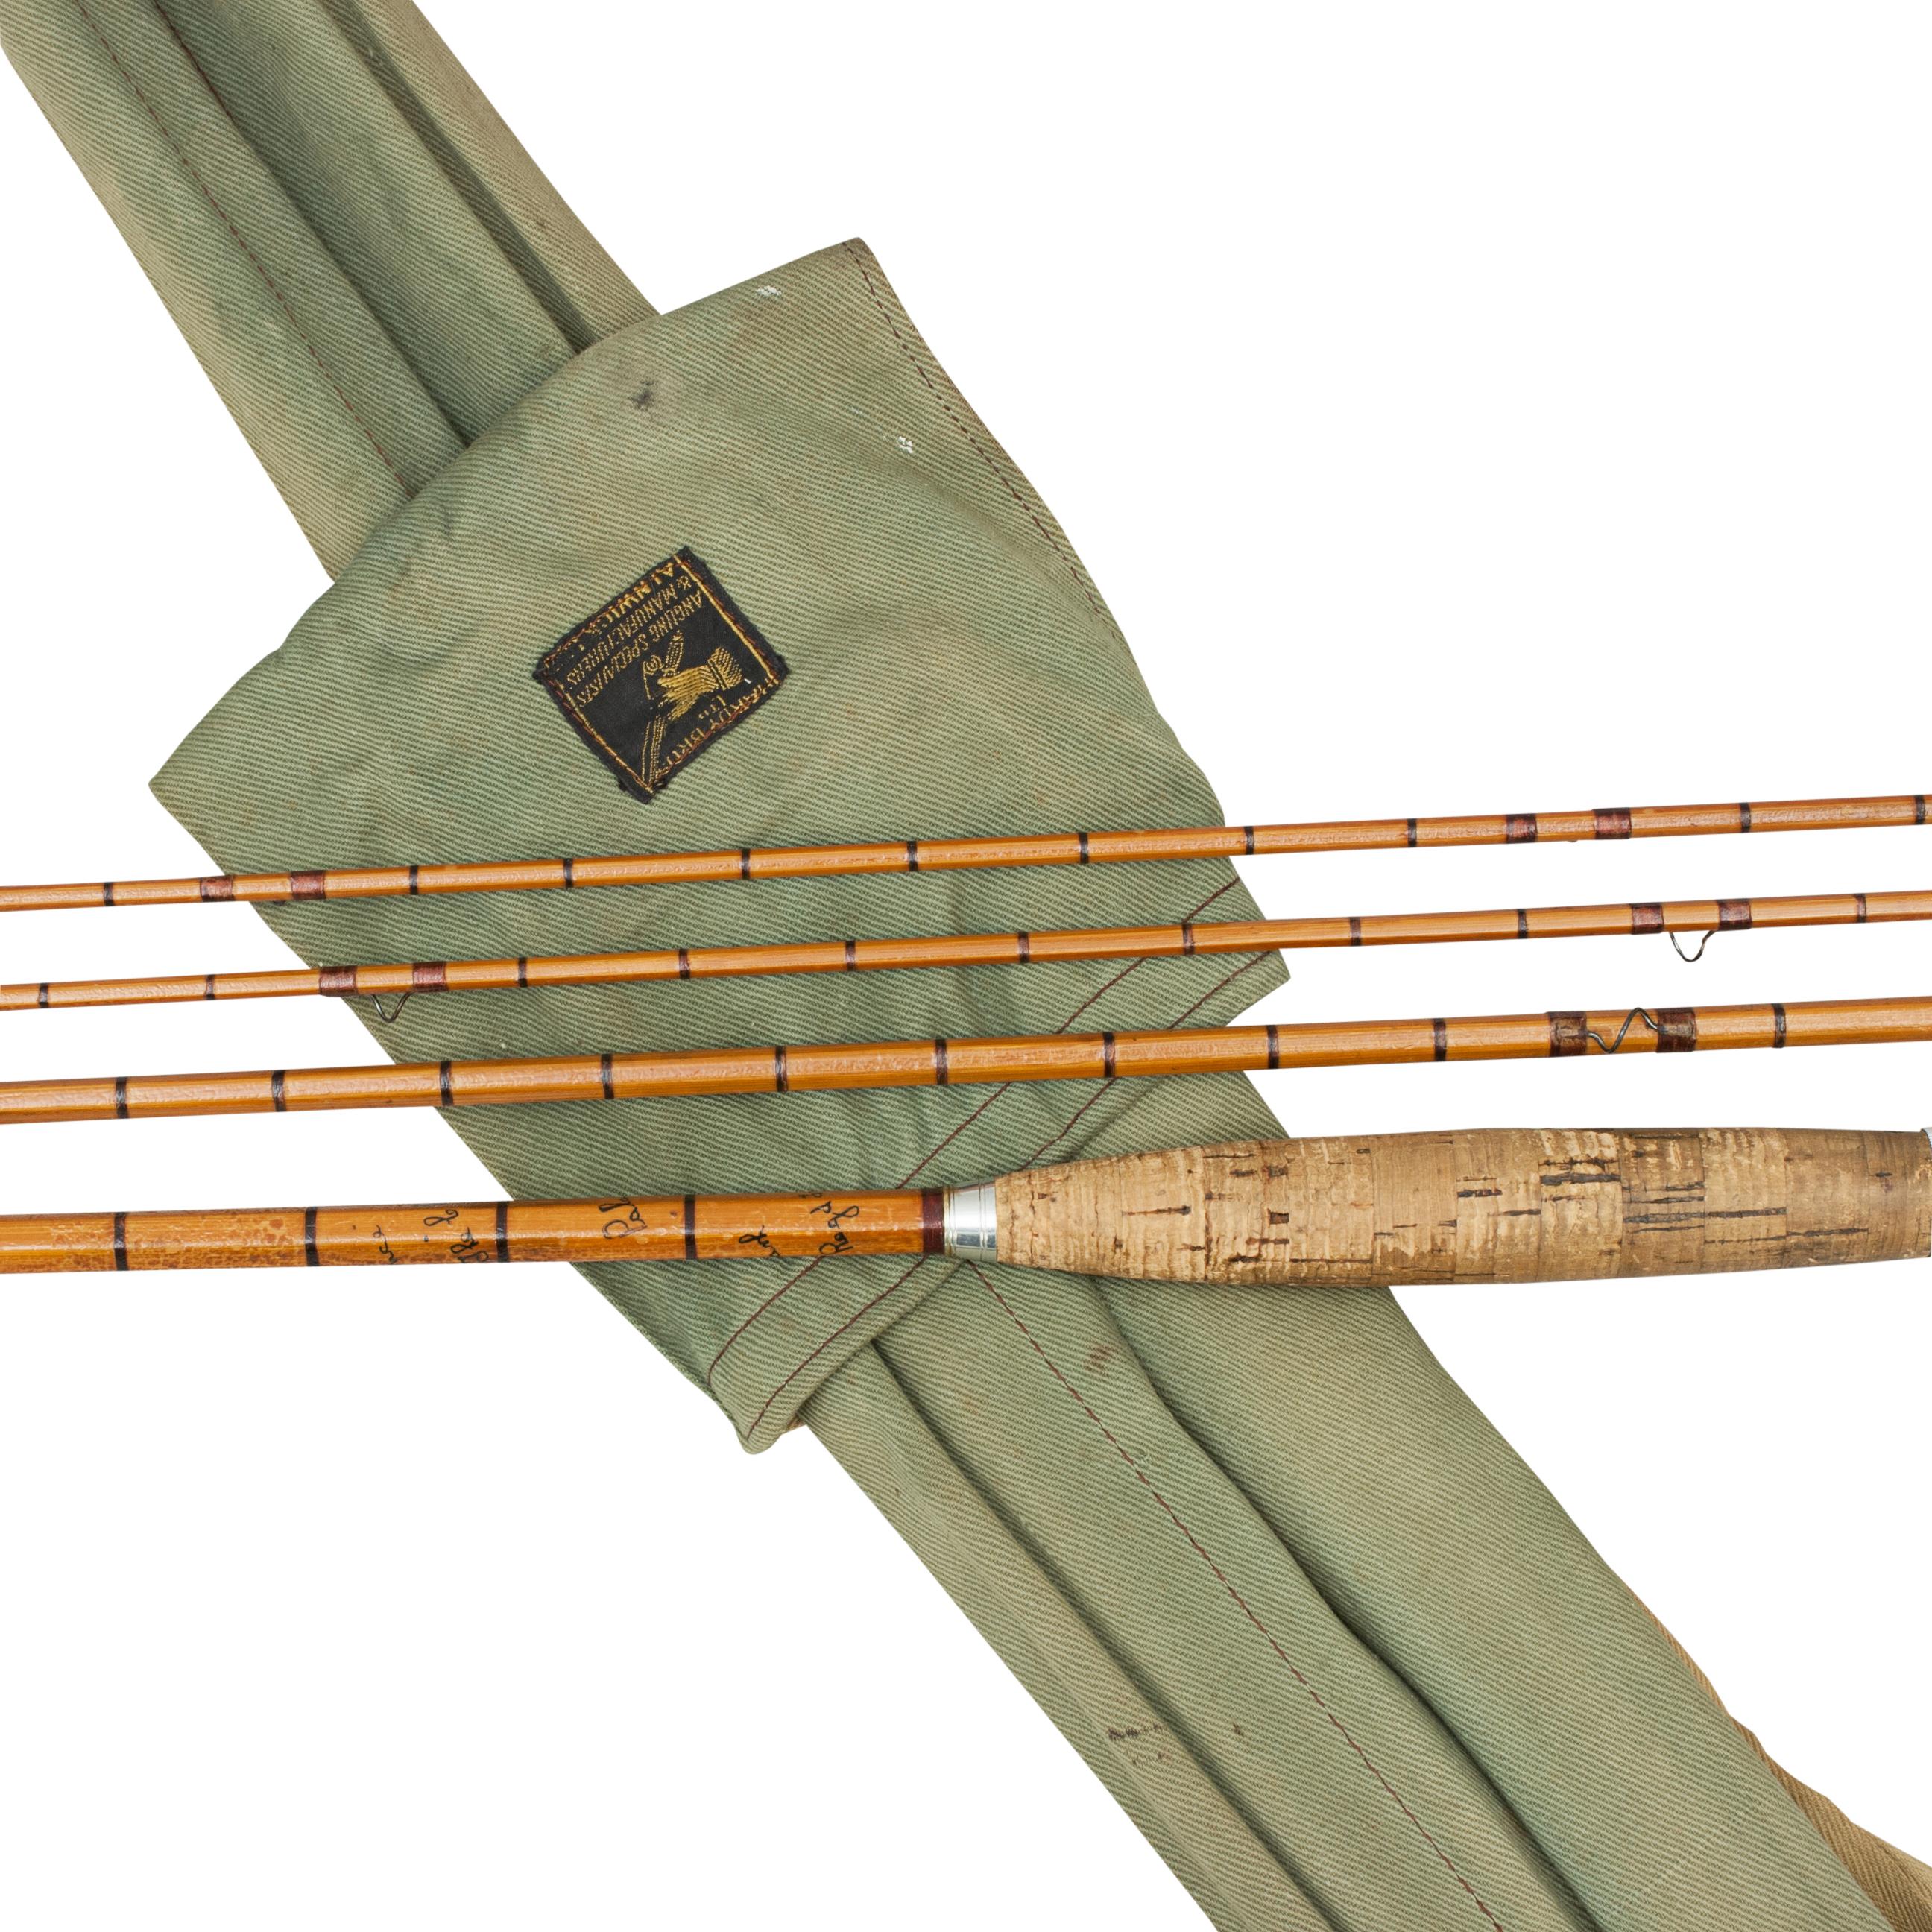 Vintage three-piece Hardy Trout Fly rod, The 'C.C. de France'.
The Hardy 'C.C. de France' is a split cane Palakona 3-piece rod with spare tip made by Hardy's of Alnwick. The rod is in good used condition with red silk whippings, suction joints,